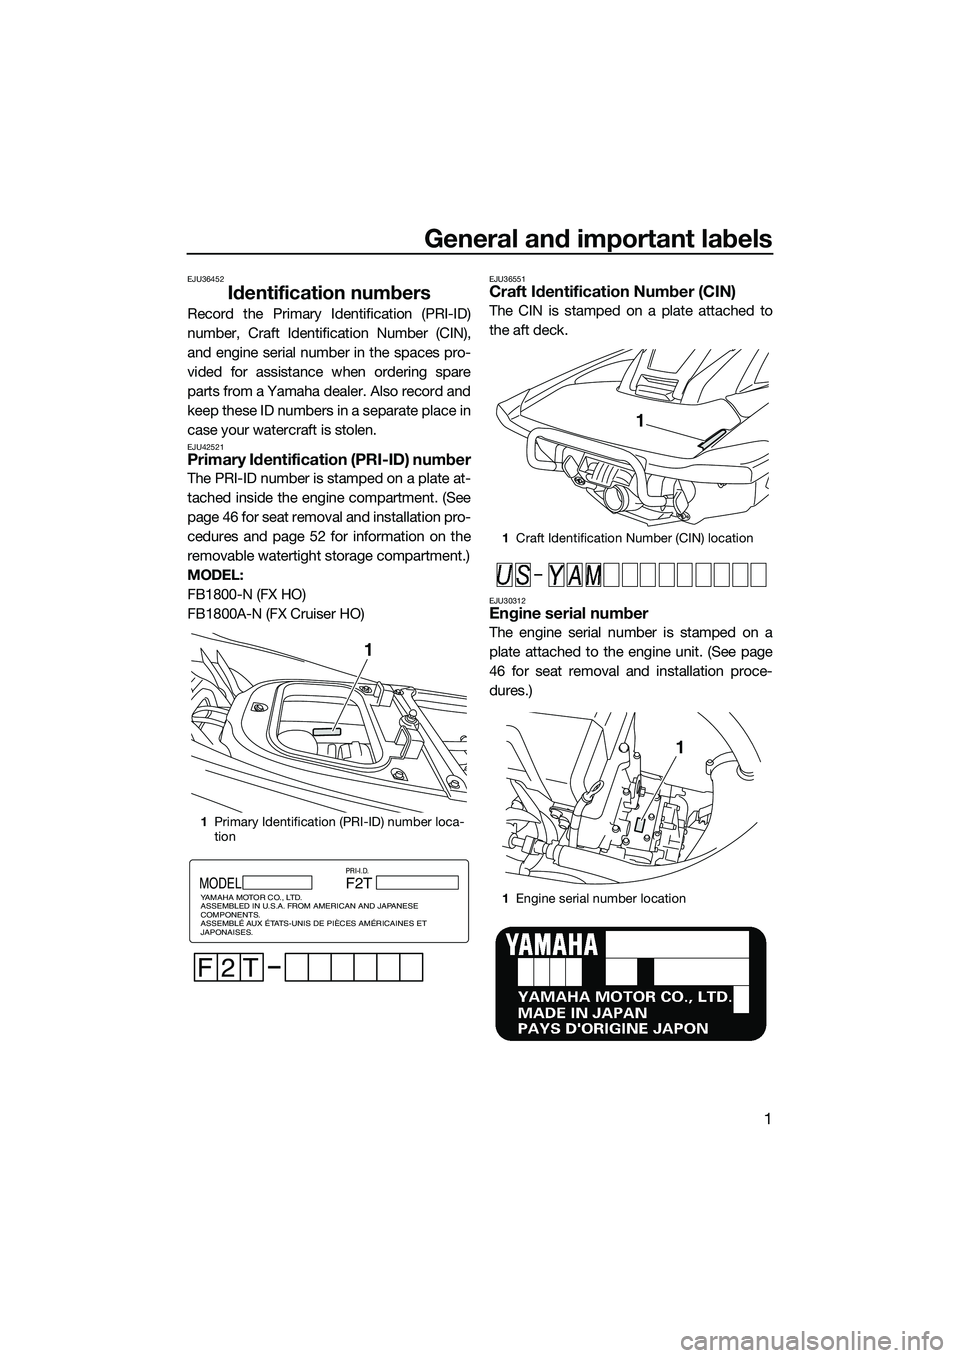 YAMAHA FX HO 2014  Owners Manual General and important labels
1
EJU36452
Identification numbers
Record the Primary Identification (PRI-ID)
number, Craft Identification Number (CIN),
and engine serial number in the spaces pro-
vided f